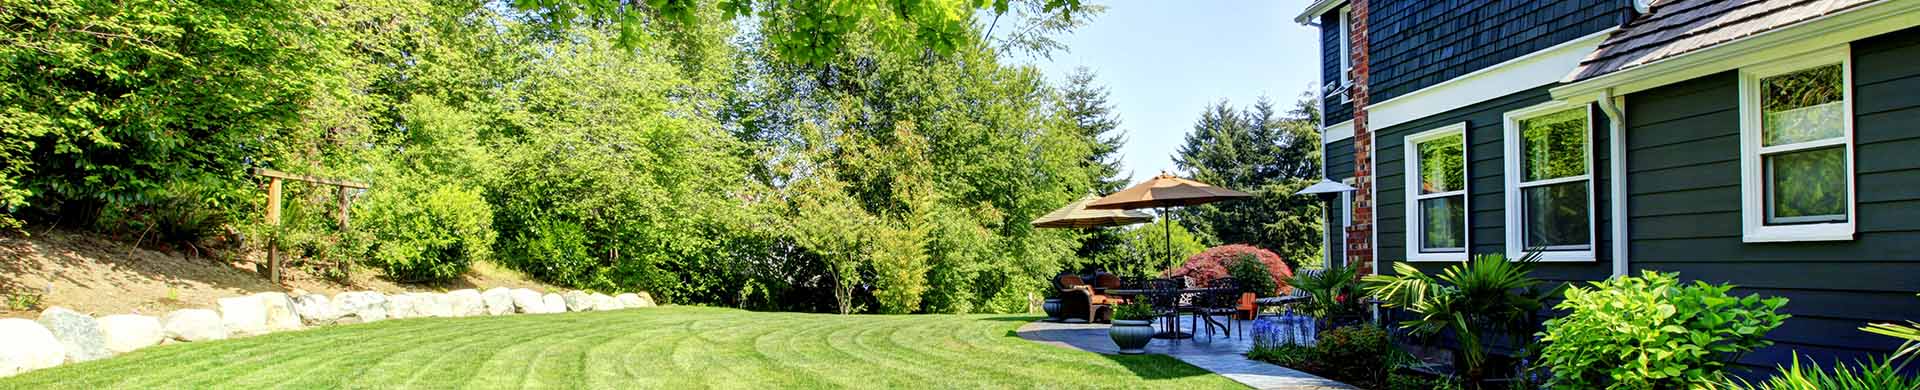 Privacy Trees To Fill In Your Backyard